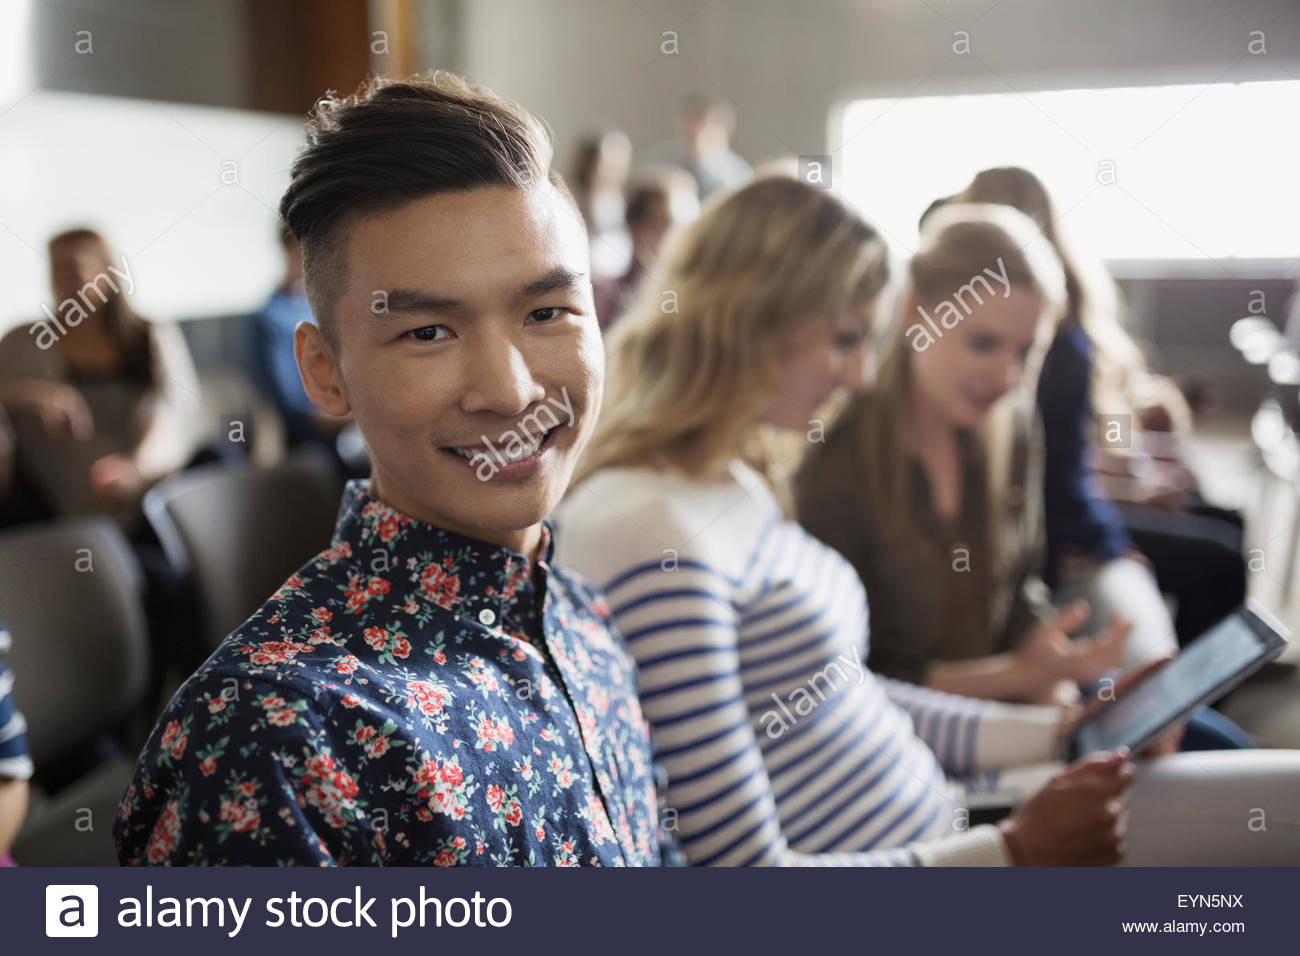 Portrait of smiling student in lecture audience Banque D'Images